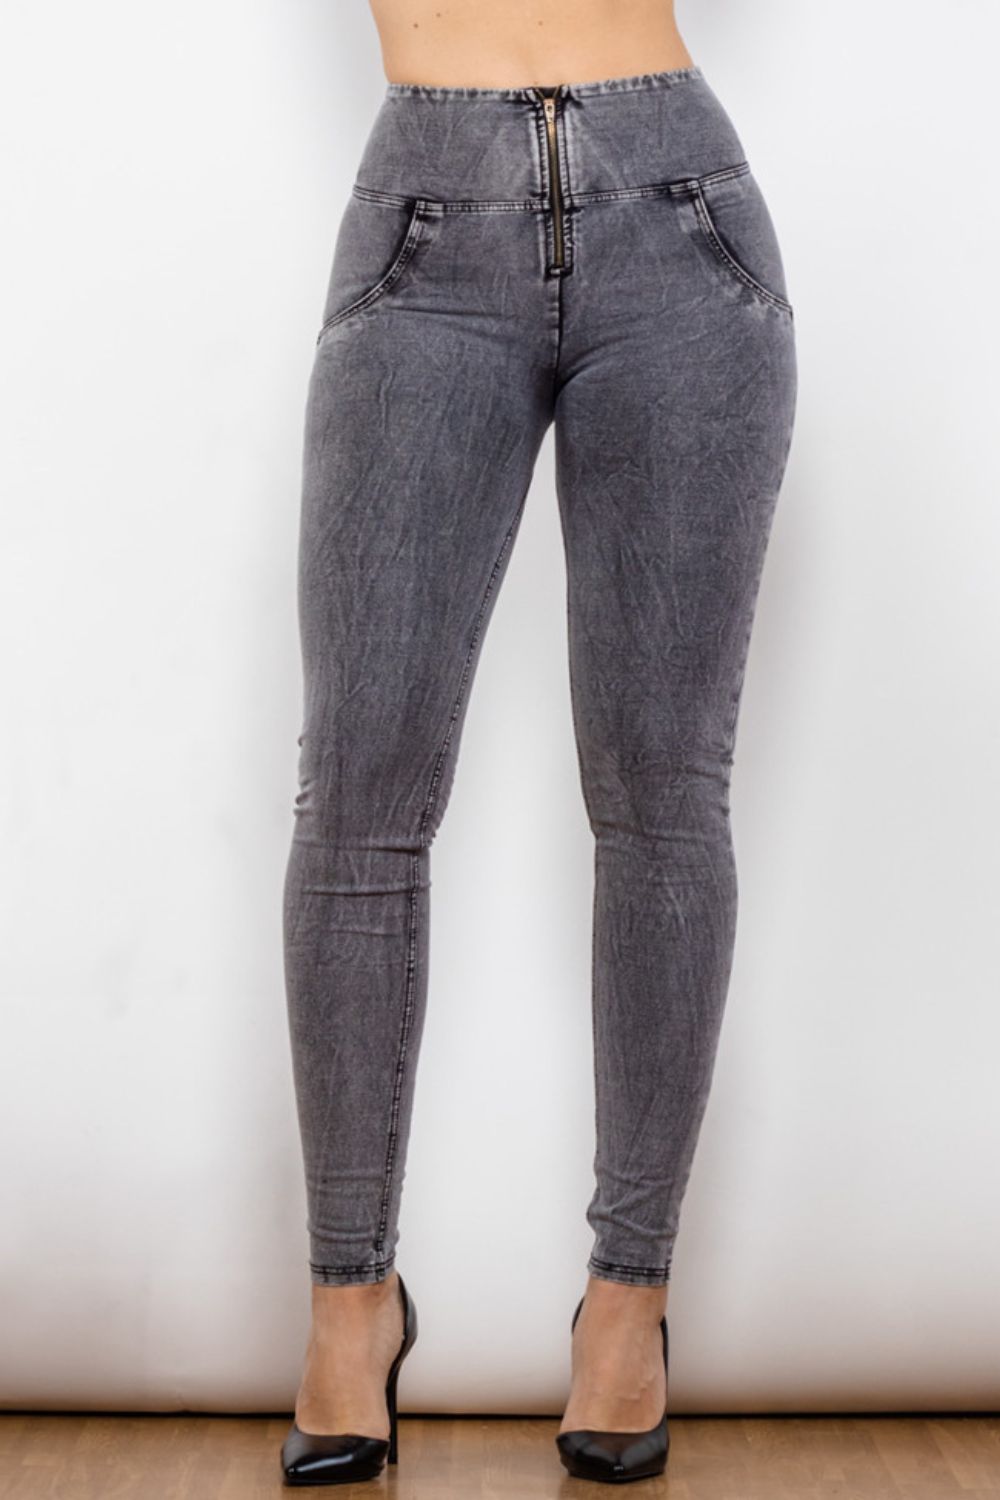 Zip Closure Skinny Jeans with Pockets - Jeans - FITGGINS